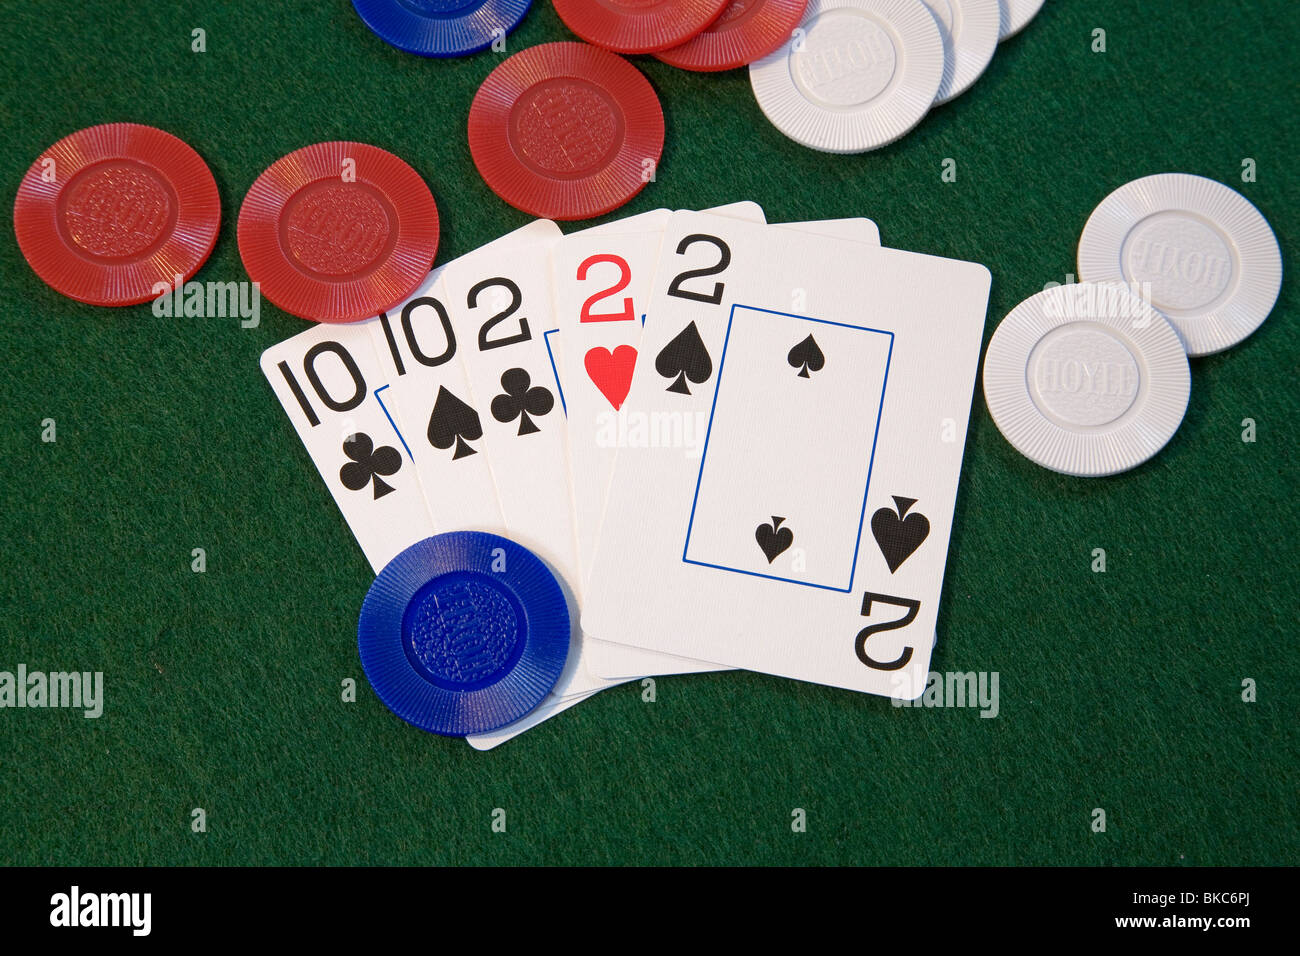 A 'full house' poker hand, treys and tens, a good poker hand in five card draw or stud poker deck of cards poker game Stock Photo